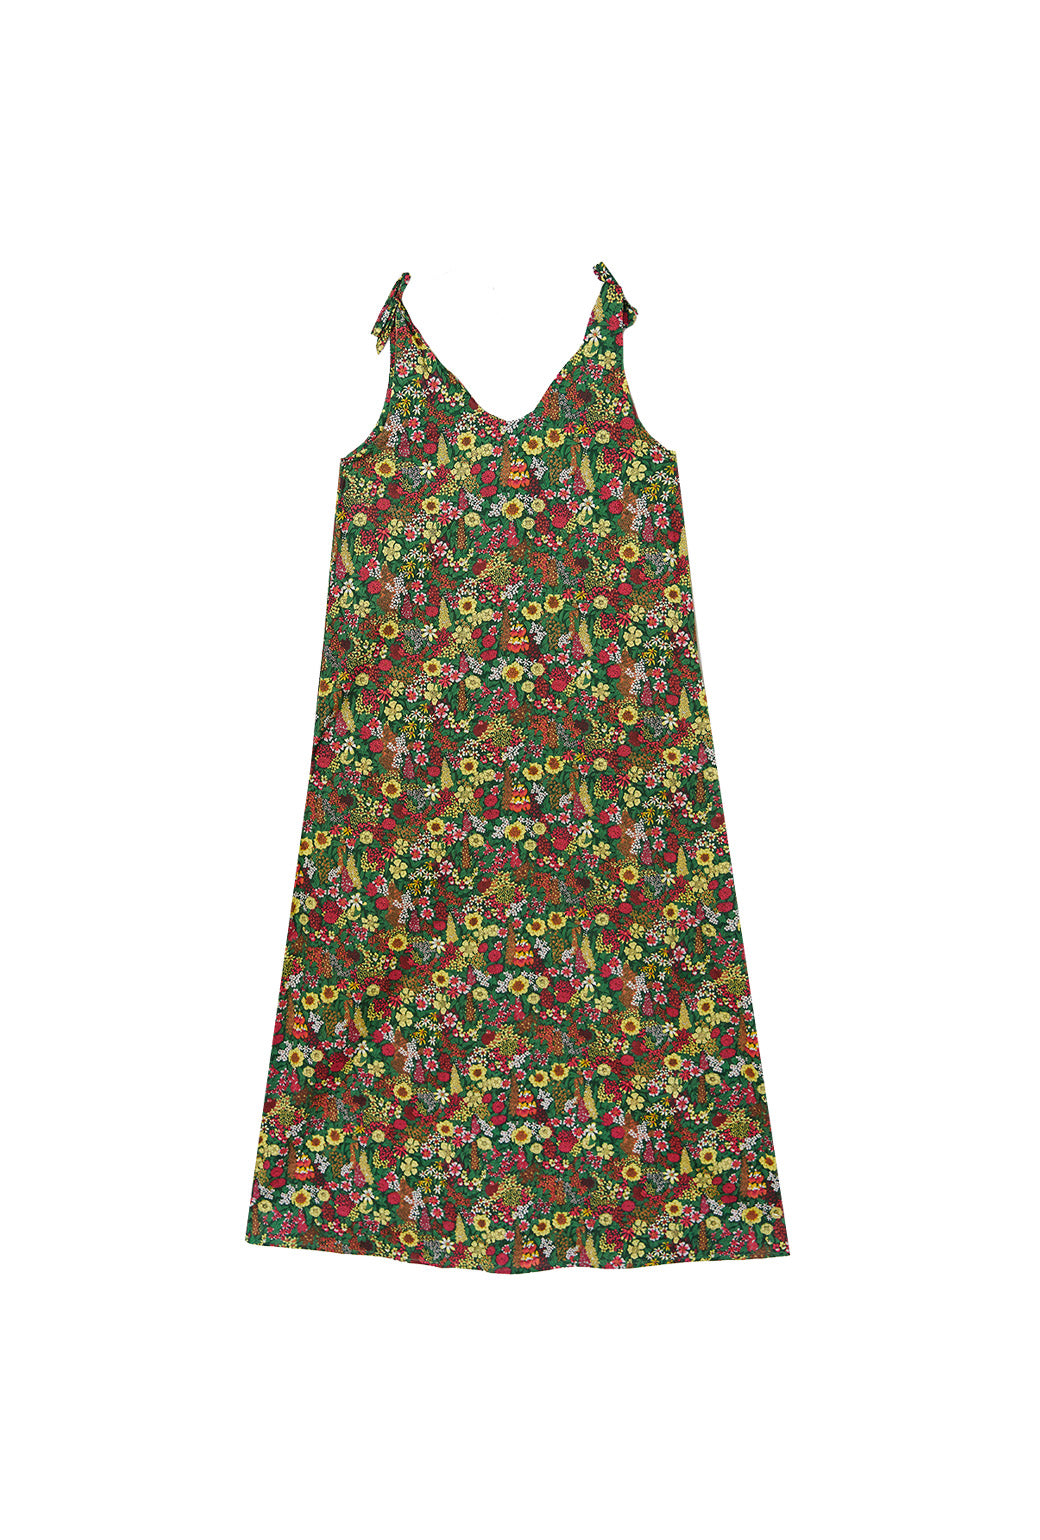 Buy Green Jacquard Tie Waist Dress from Next Lithuania